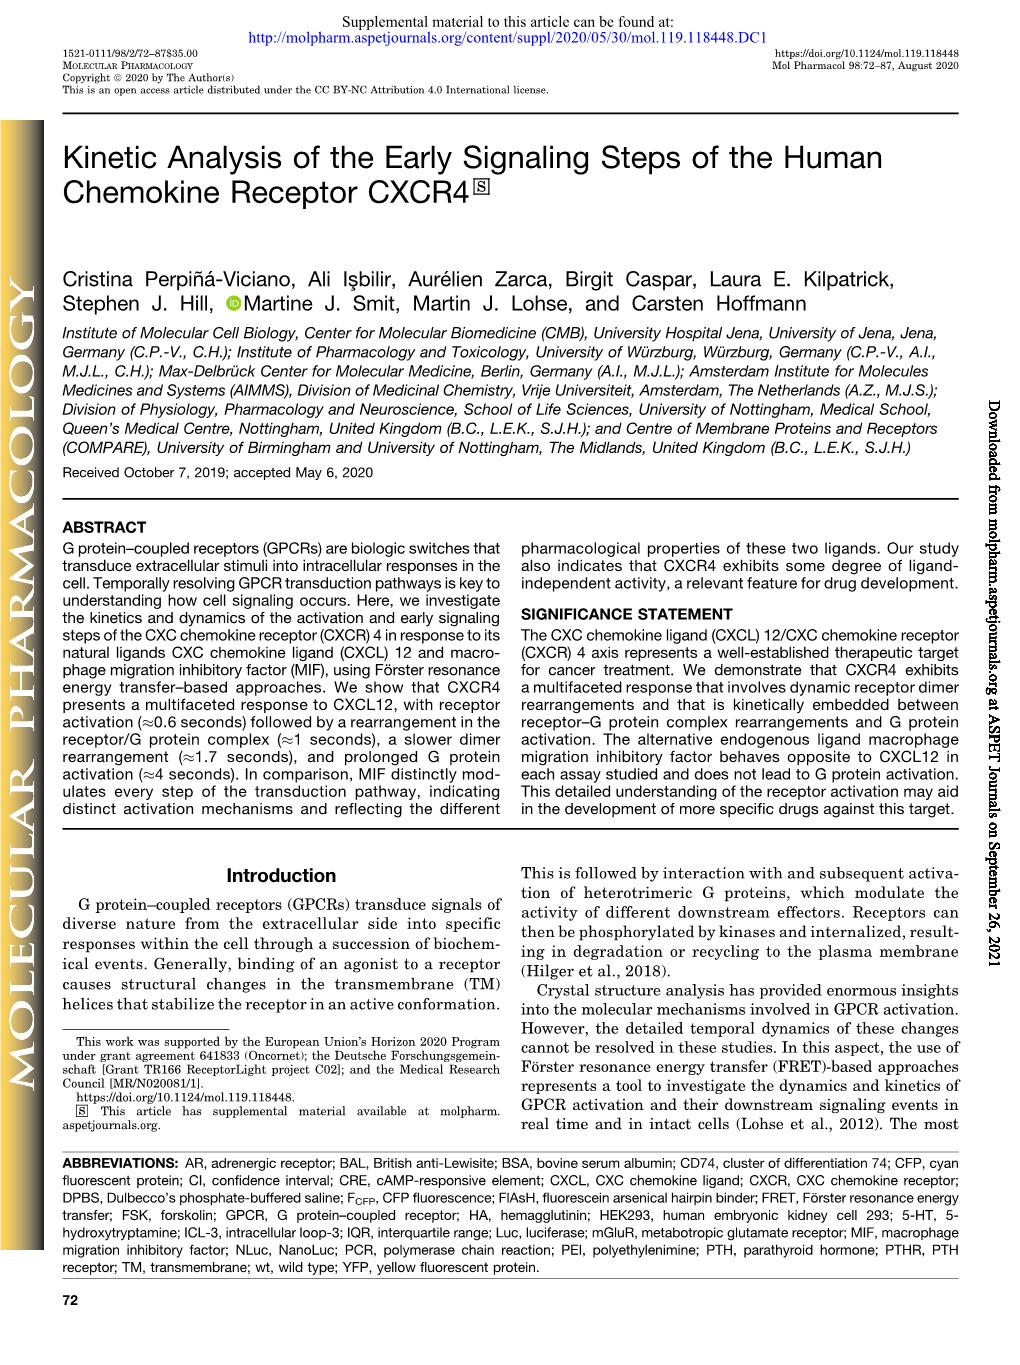 Kinetic Analysis of the Early Signaling Steps of the Human Chemokine Receptor CXCR4 S